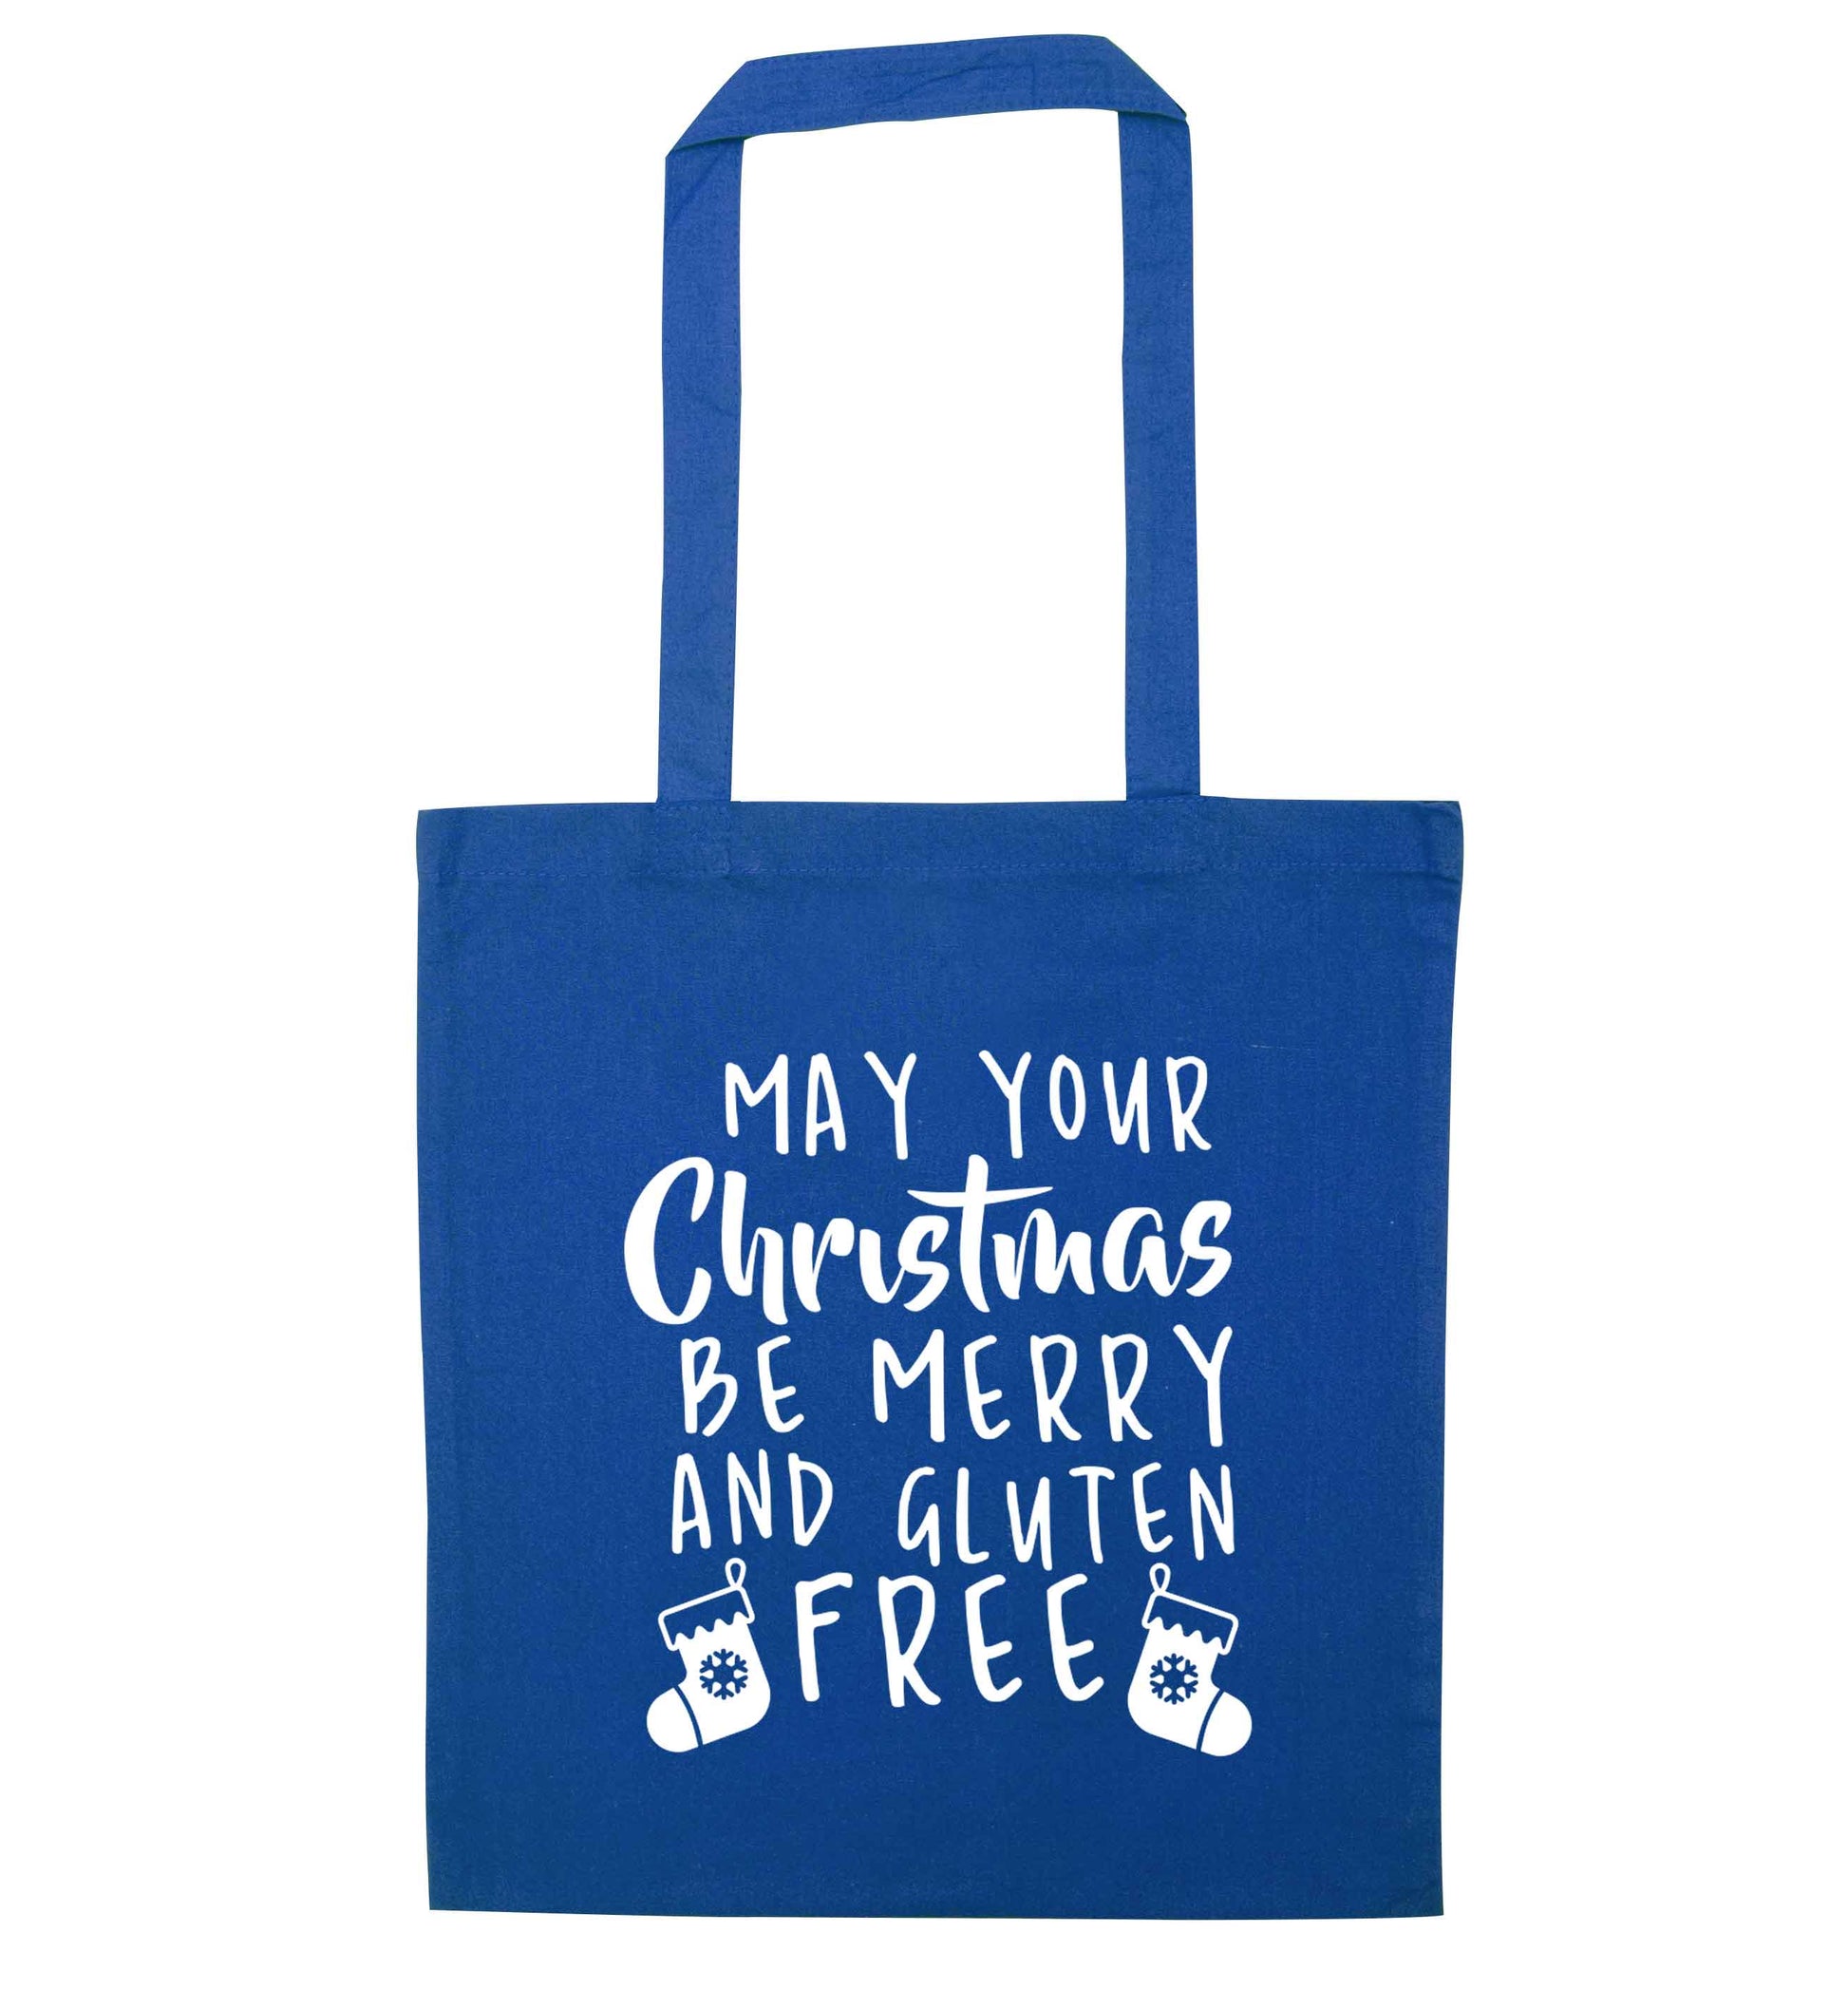 May your Christmas be merry and gluten free blue tote bag